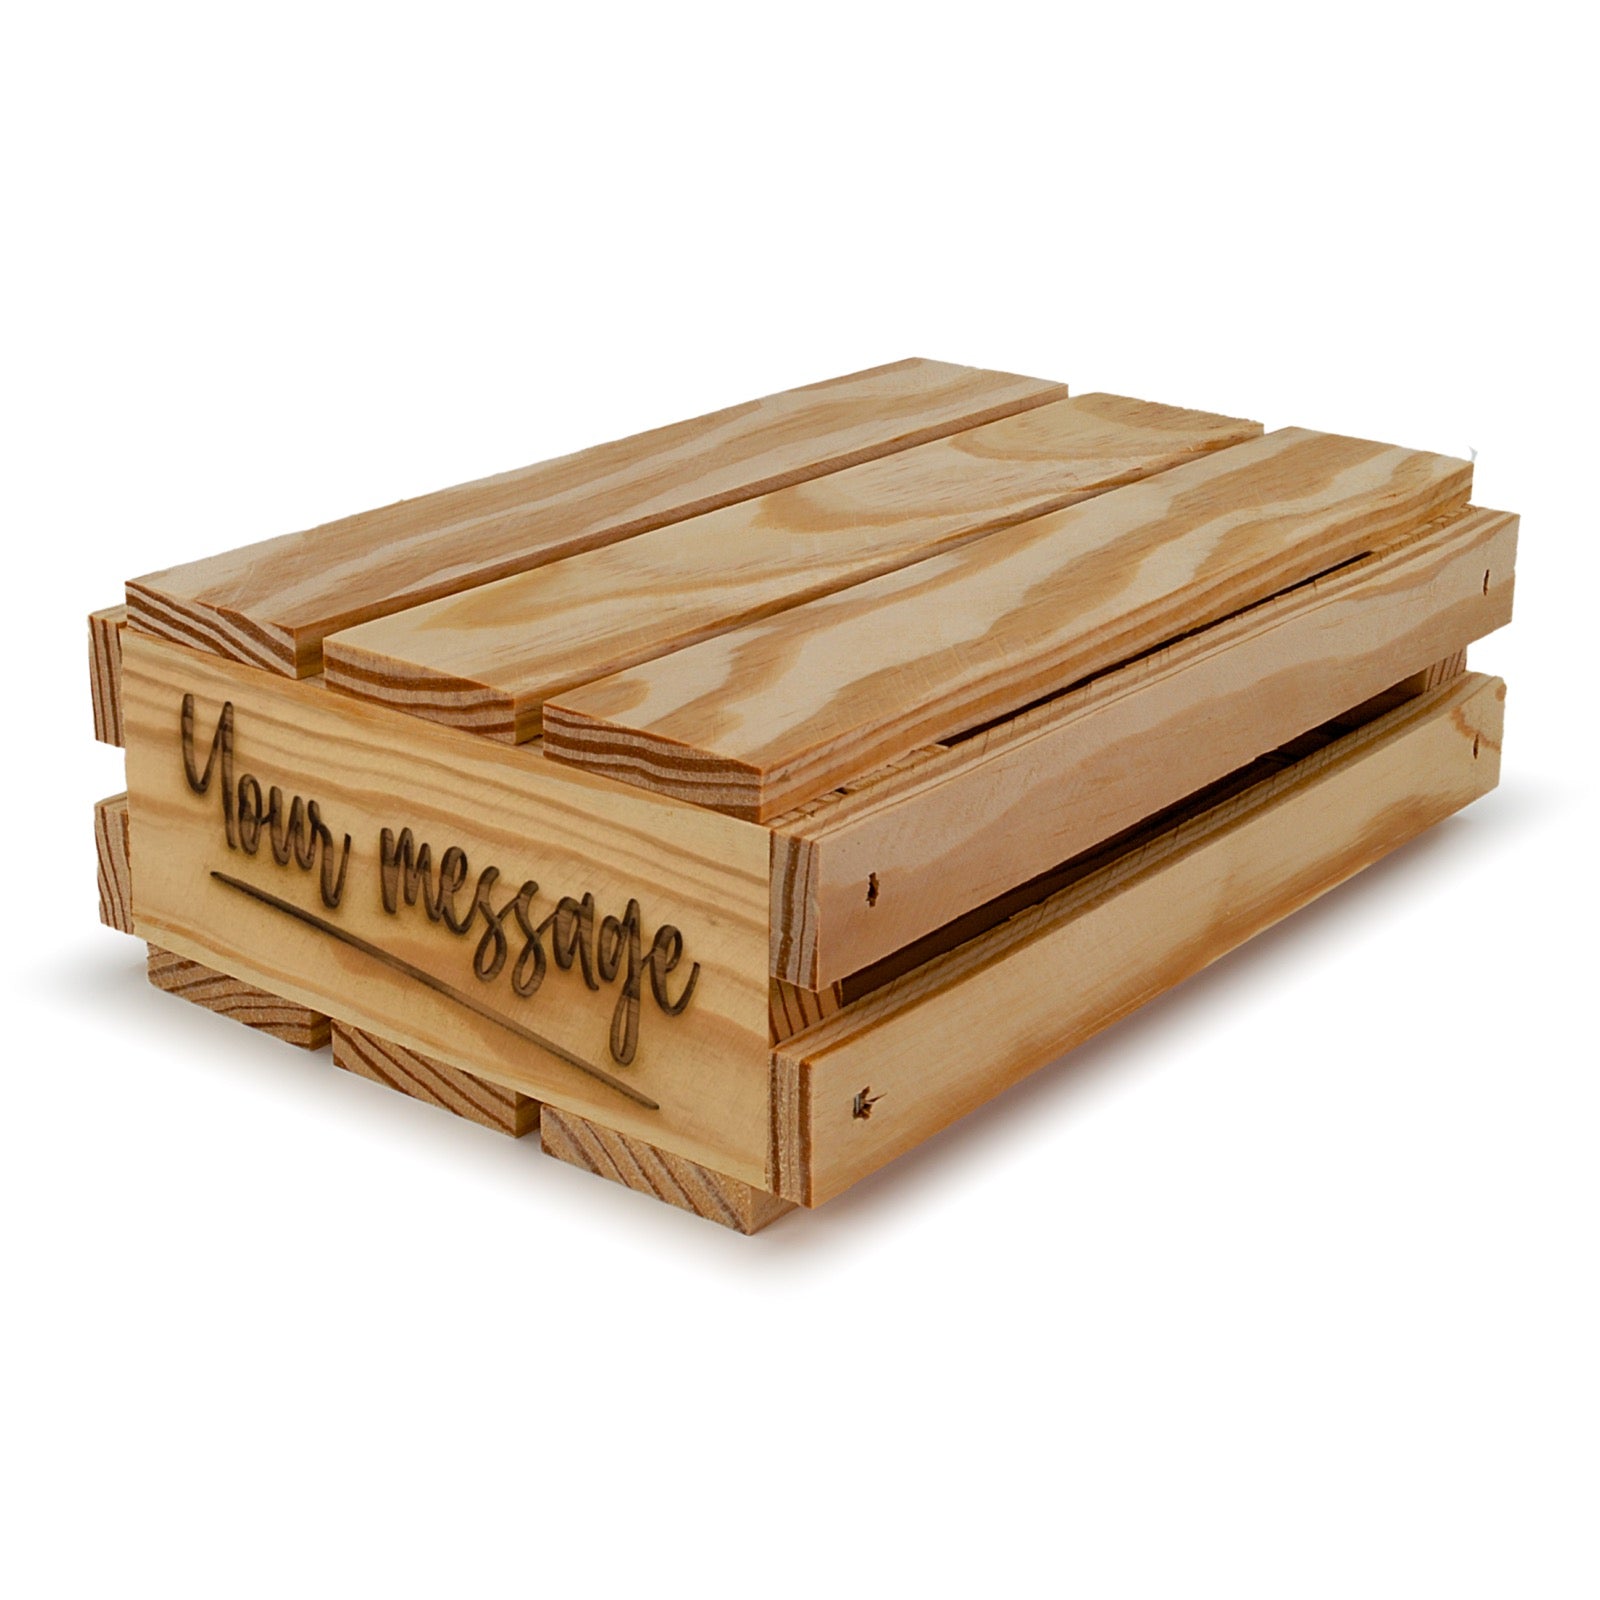 Small wooden crates with lid and your custom message 8x6x2.5, 6-SS-8-6-2.5-ST-NW-LL, 12-SS-8-6-2.5-ST-NW-LL, 24-SS-8-6-2.5-ST-NW-LL, 48-SS-8-6-2.5-ST-NW-LL, 96-SS-8-6-2.5-ST-NW-LL